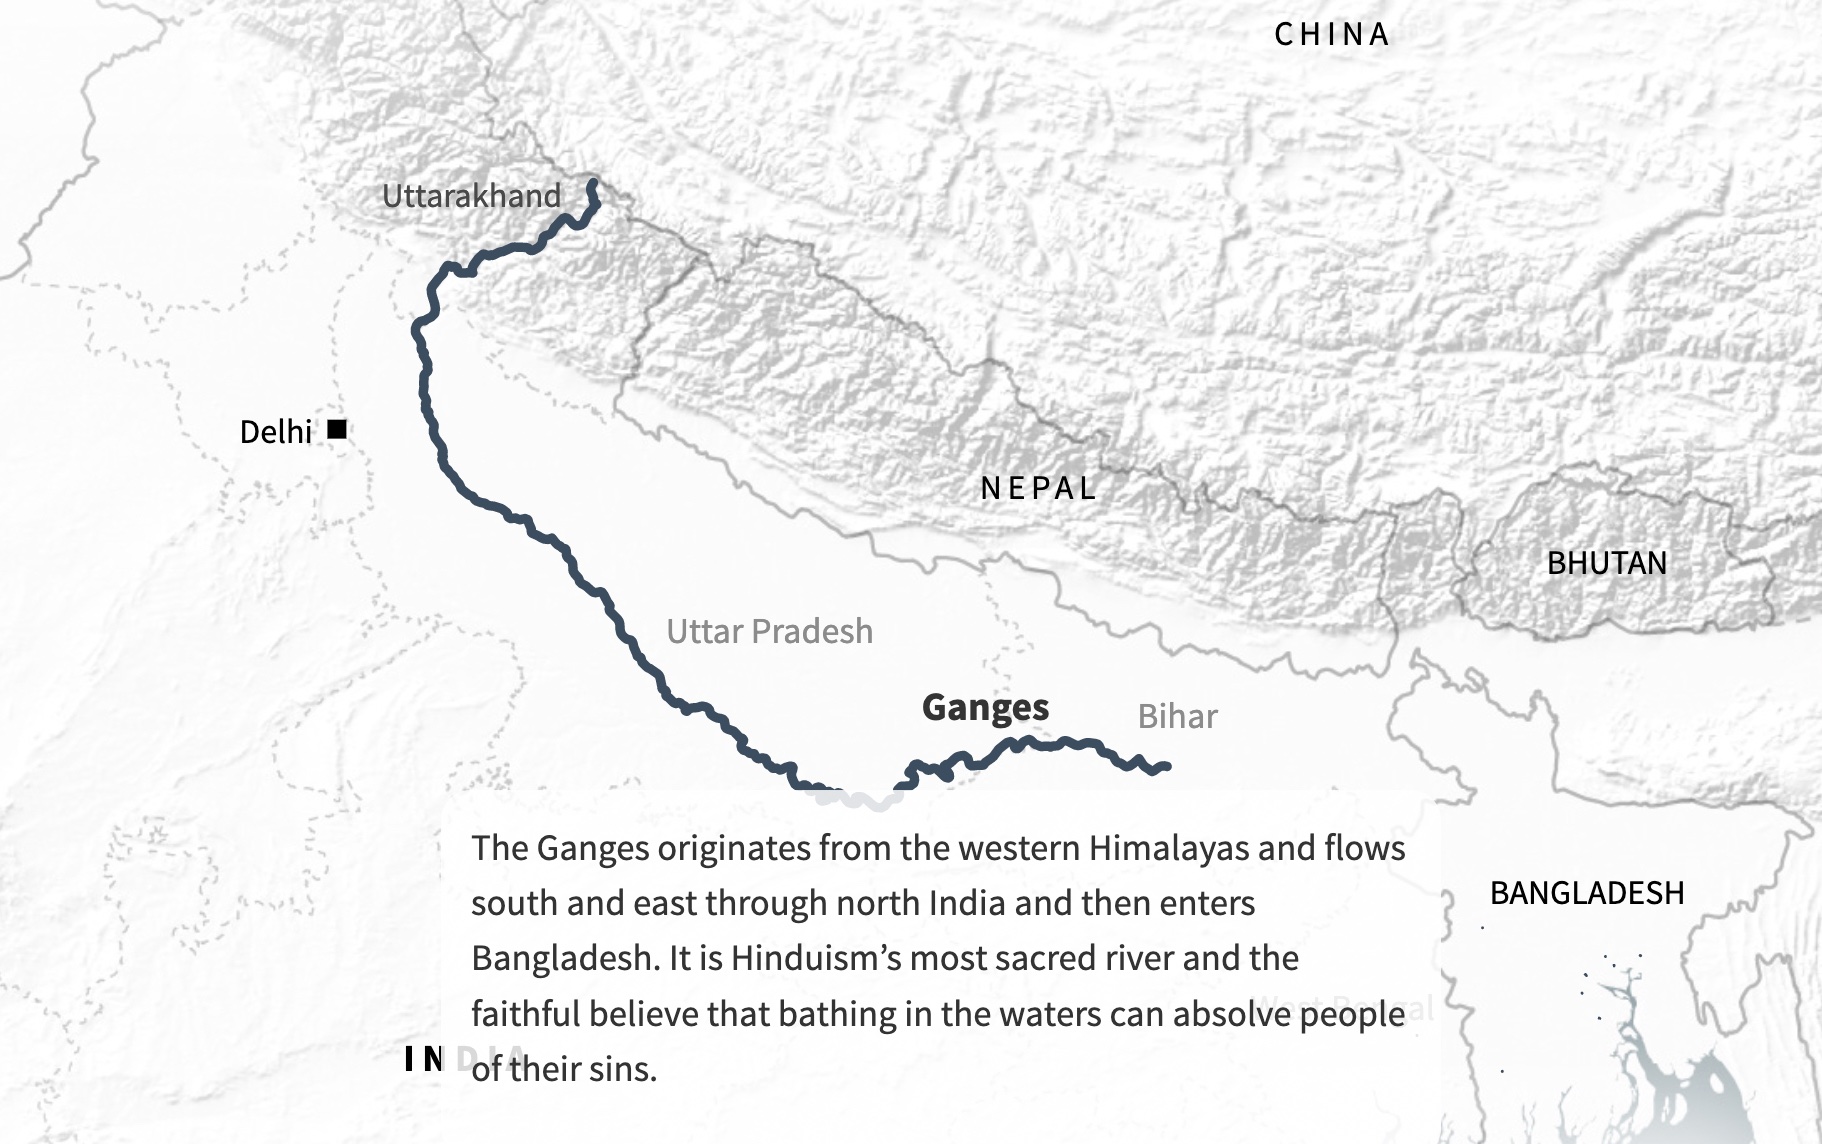 A screenshot from The race to save the river Ganges, showing a map of the river